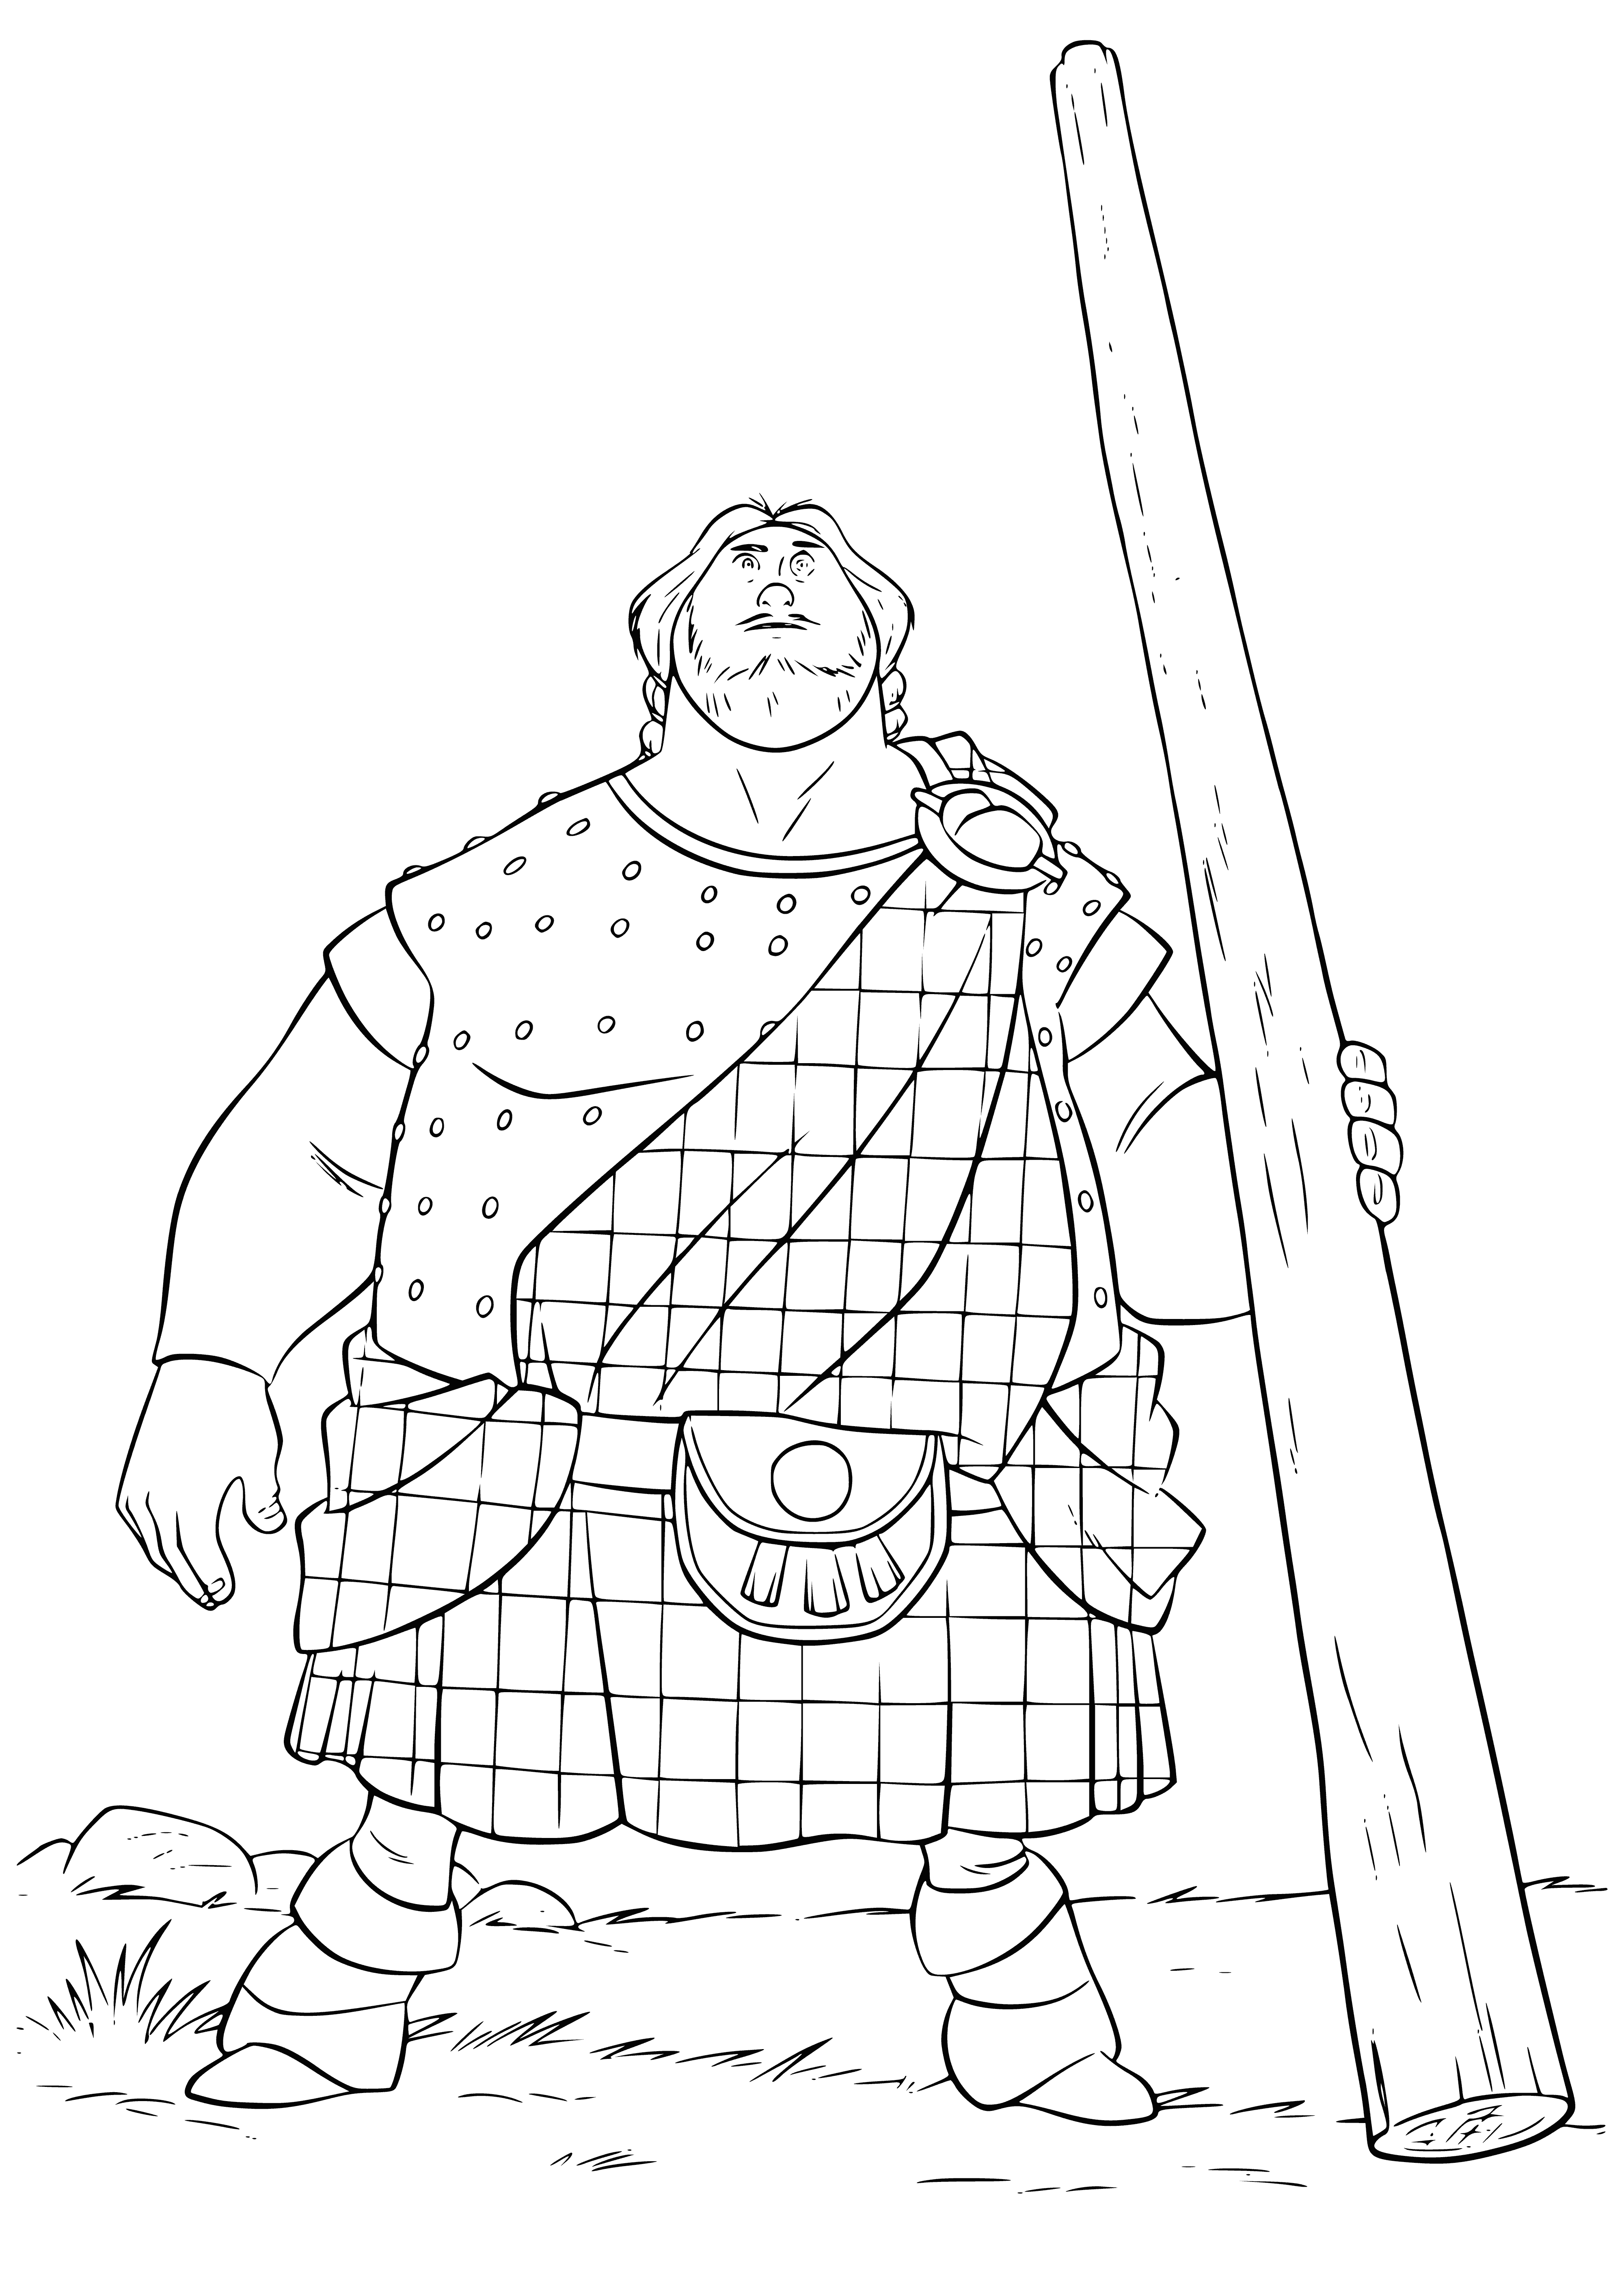 Son of Lord McGuffin coloring page